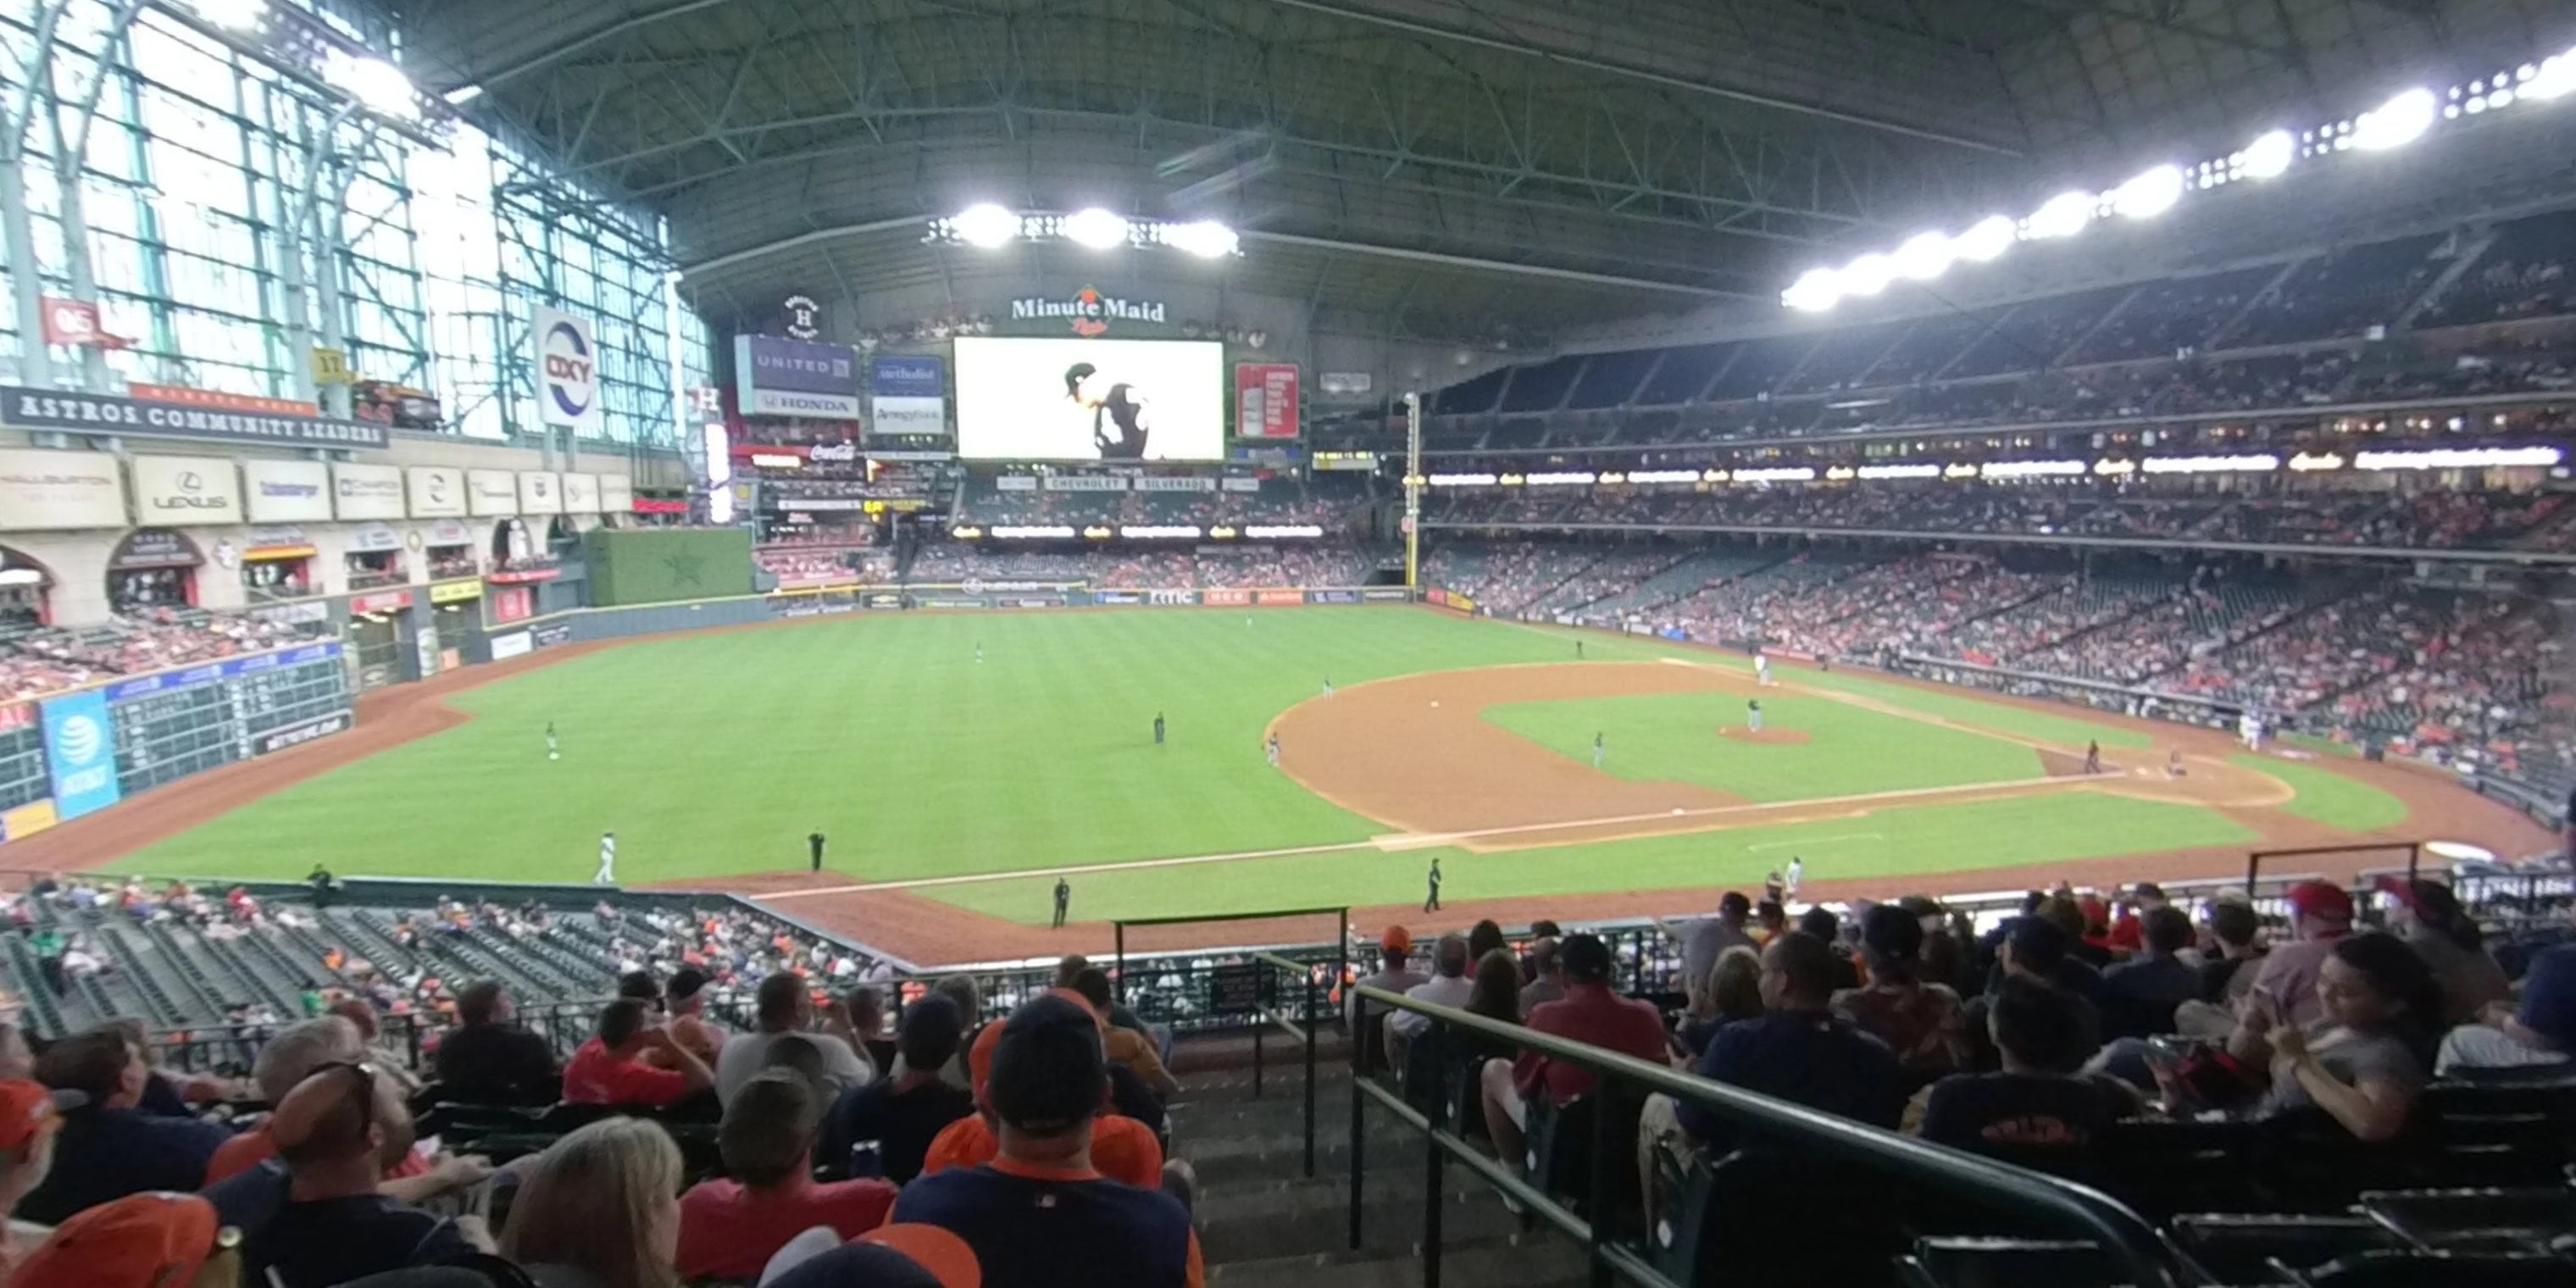 section 209 panoramic seat view  for baseball - minute maid park